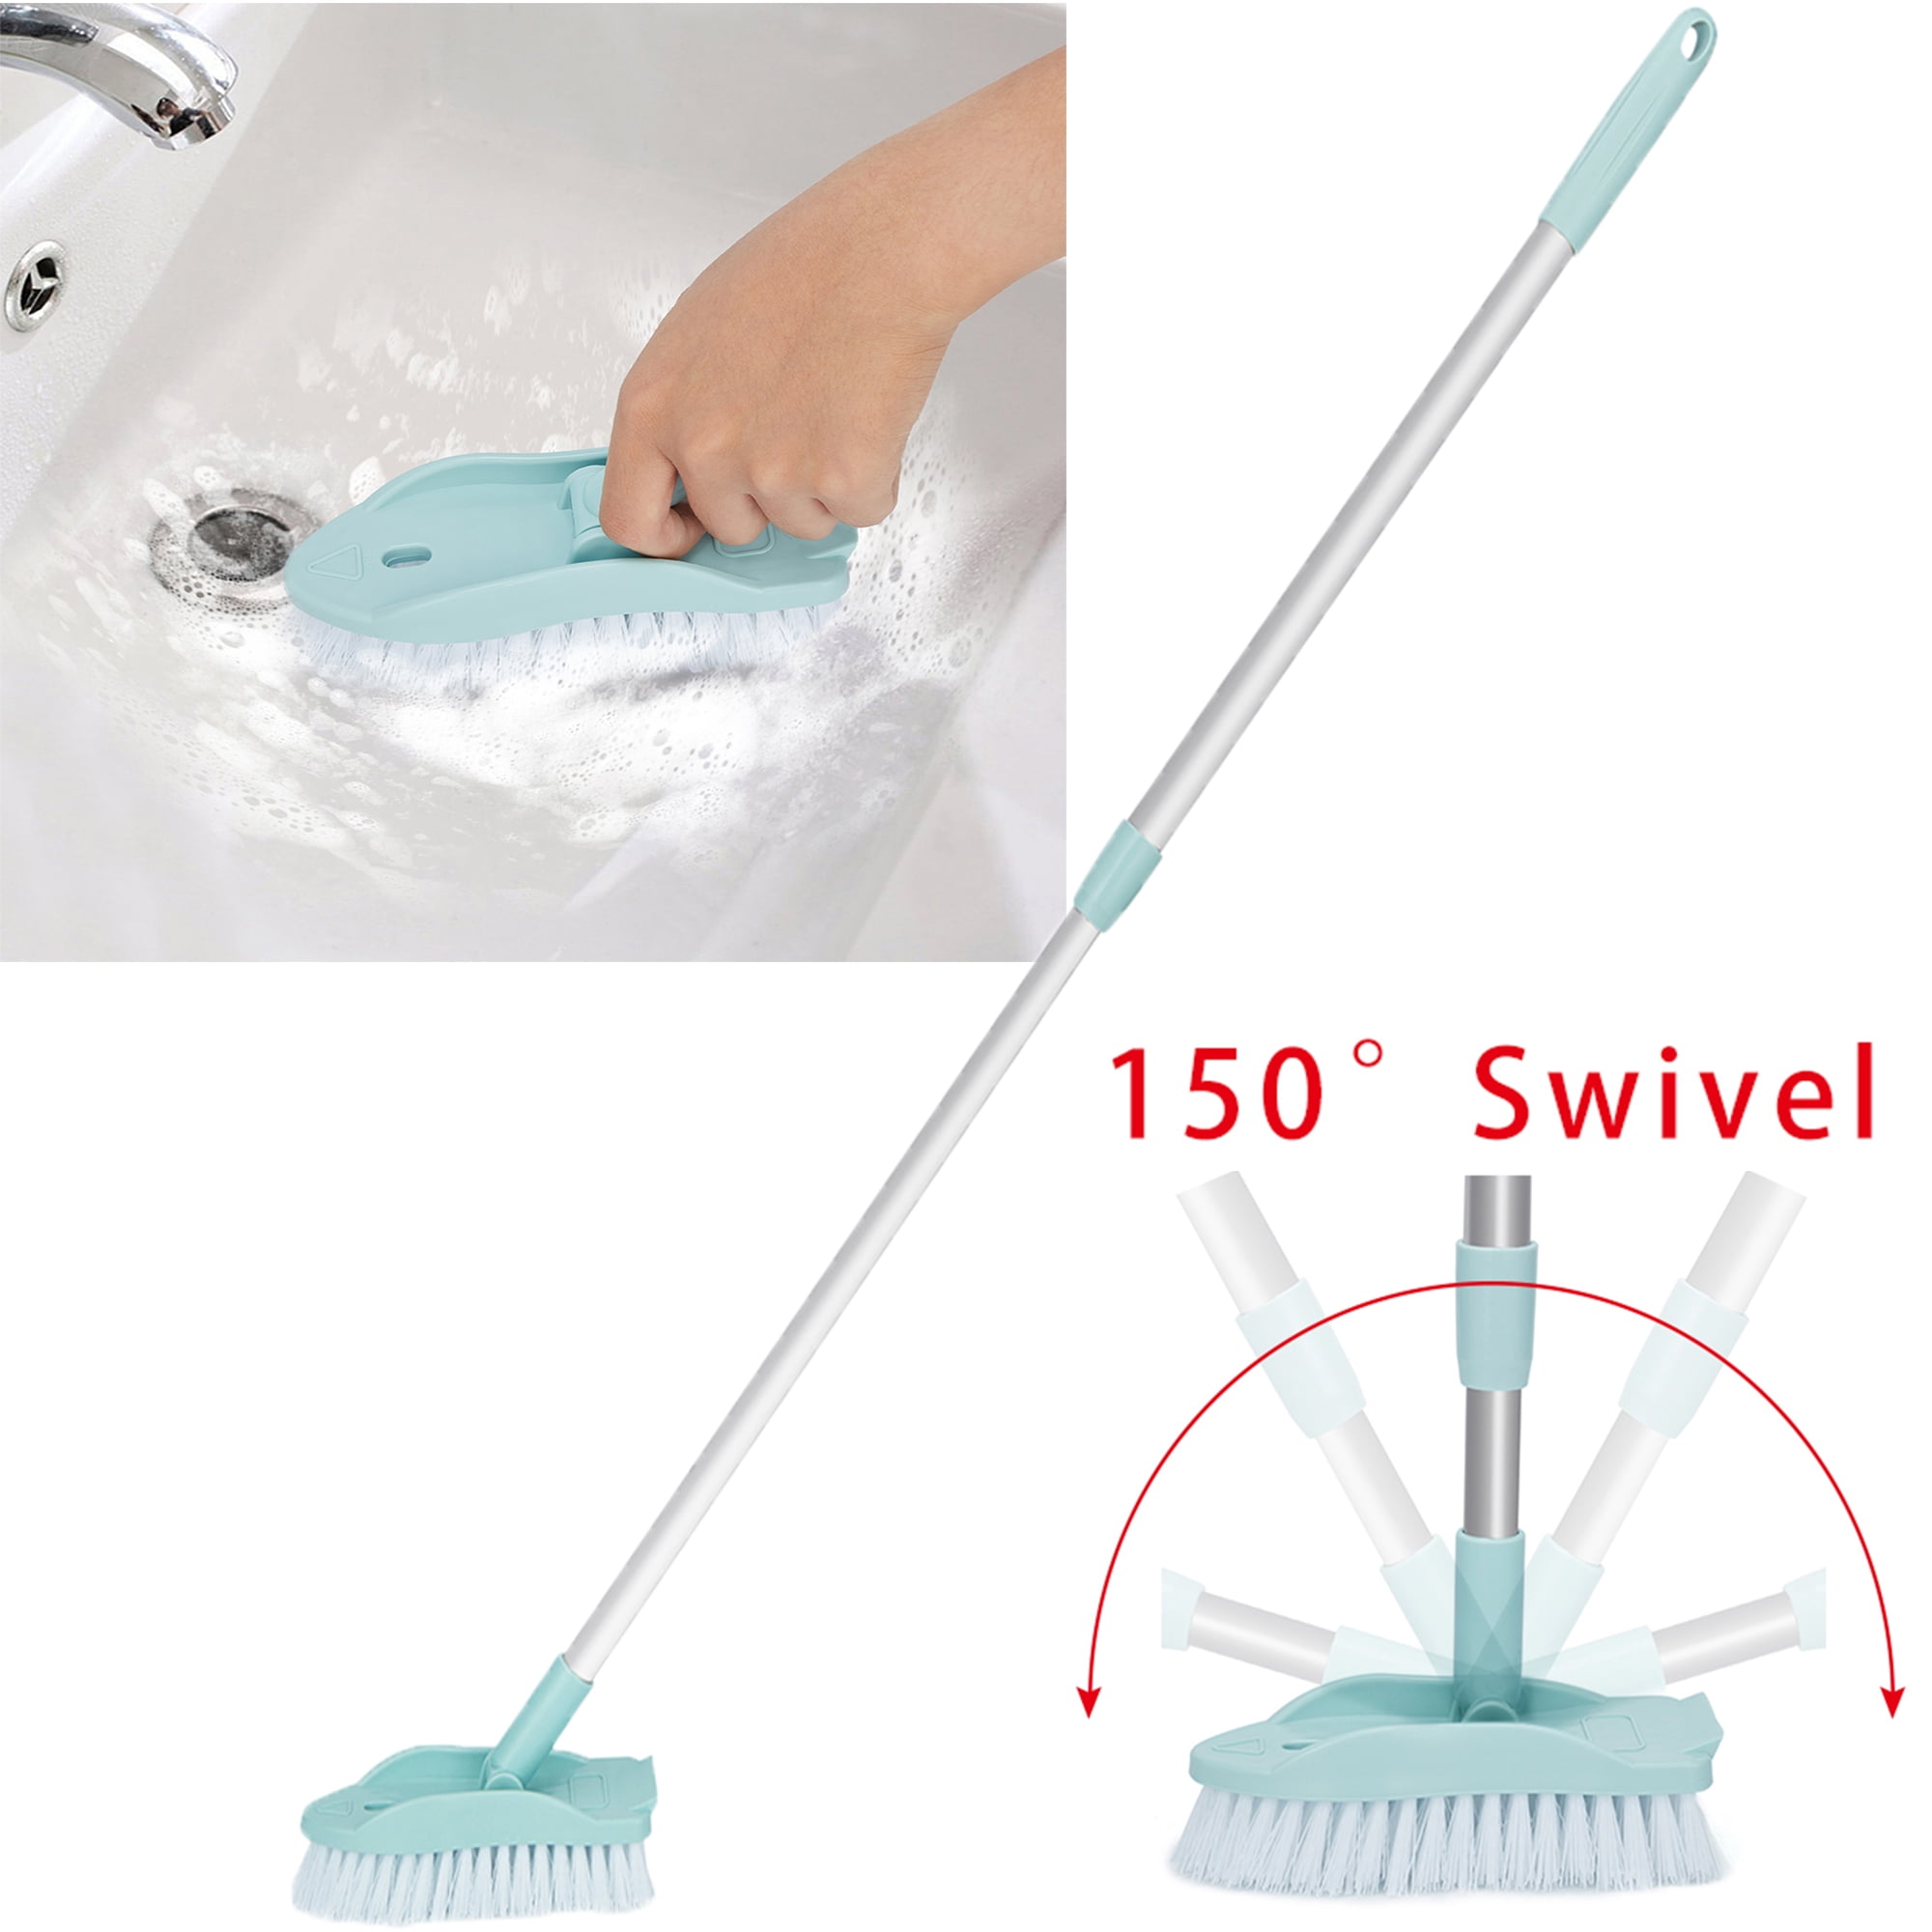  Electric Spin Scrubber, Bifoheek Power Cleaning Brush with Auto  Detergent Dispenser and 5 Replaceable Brush Heads Portable Handheld Scrubber  for Bathroom, Kitchen, Wall, Oven, Dish, Tile (White) : Health & Household